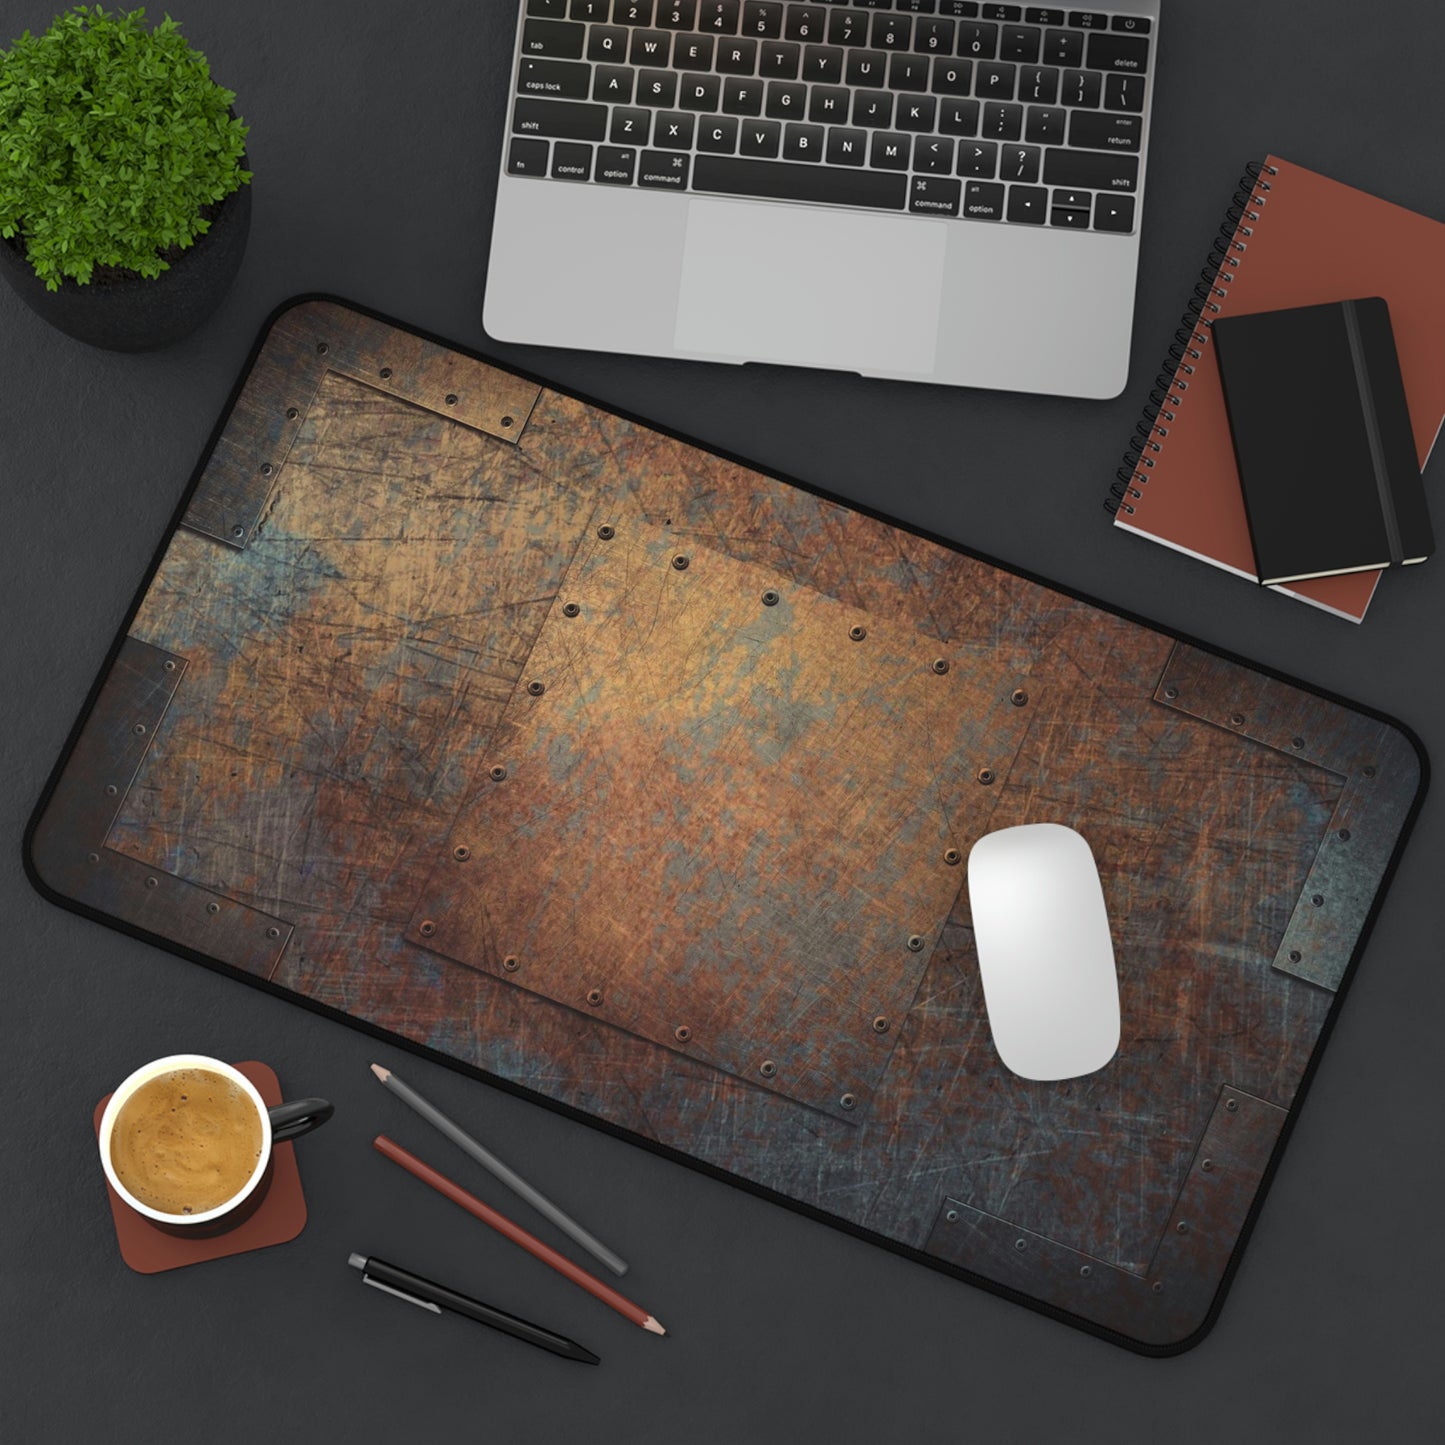 Steampunk Themed Desk Accessories - Patinated, Weather Beaten, Riveted Copper Sheets Print on Neoprene Desk Mat 12 x 22 in situ